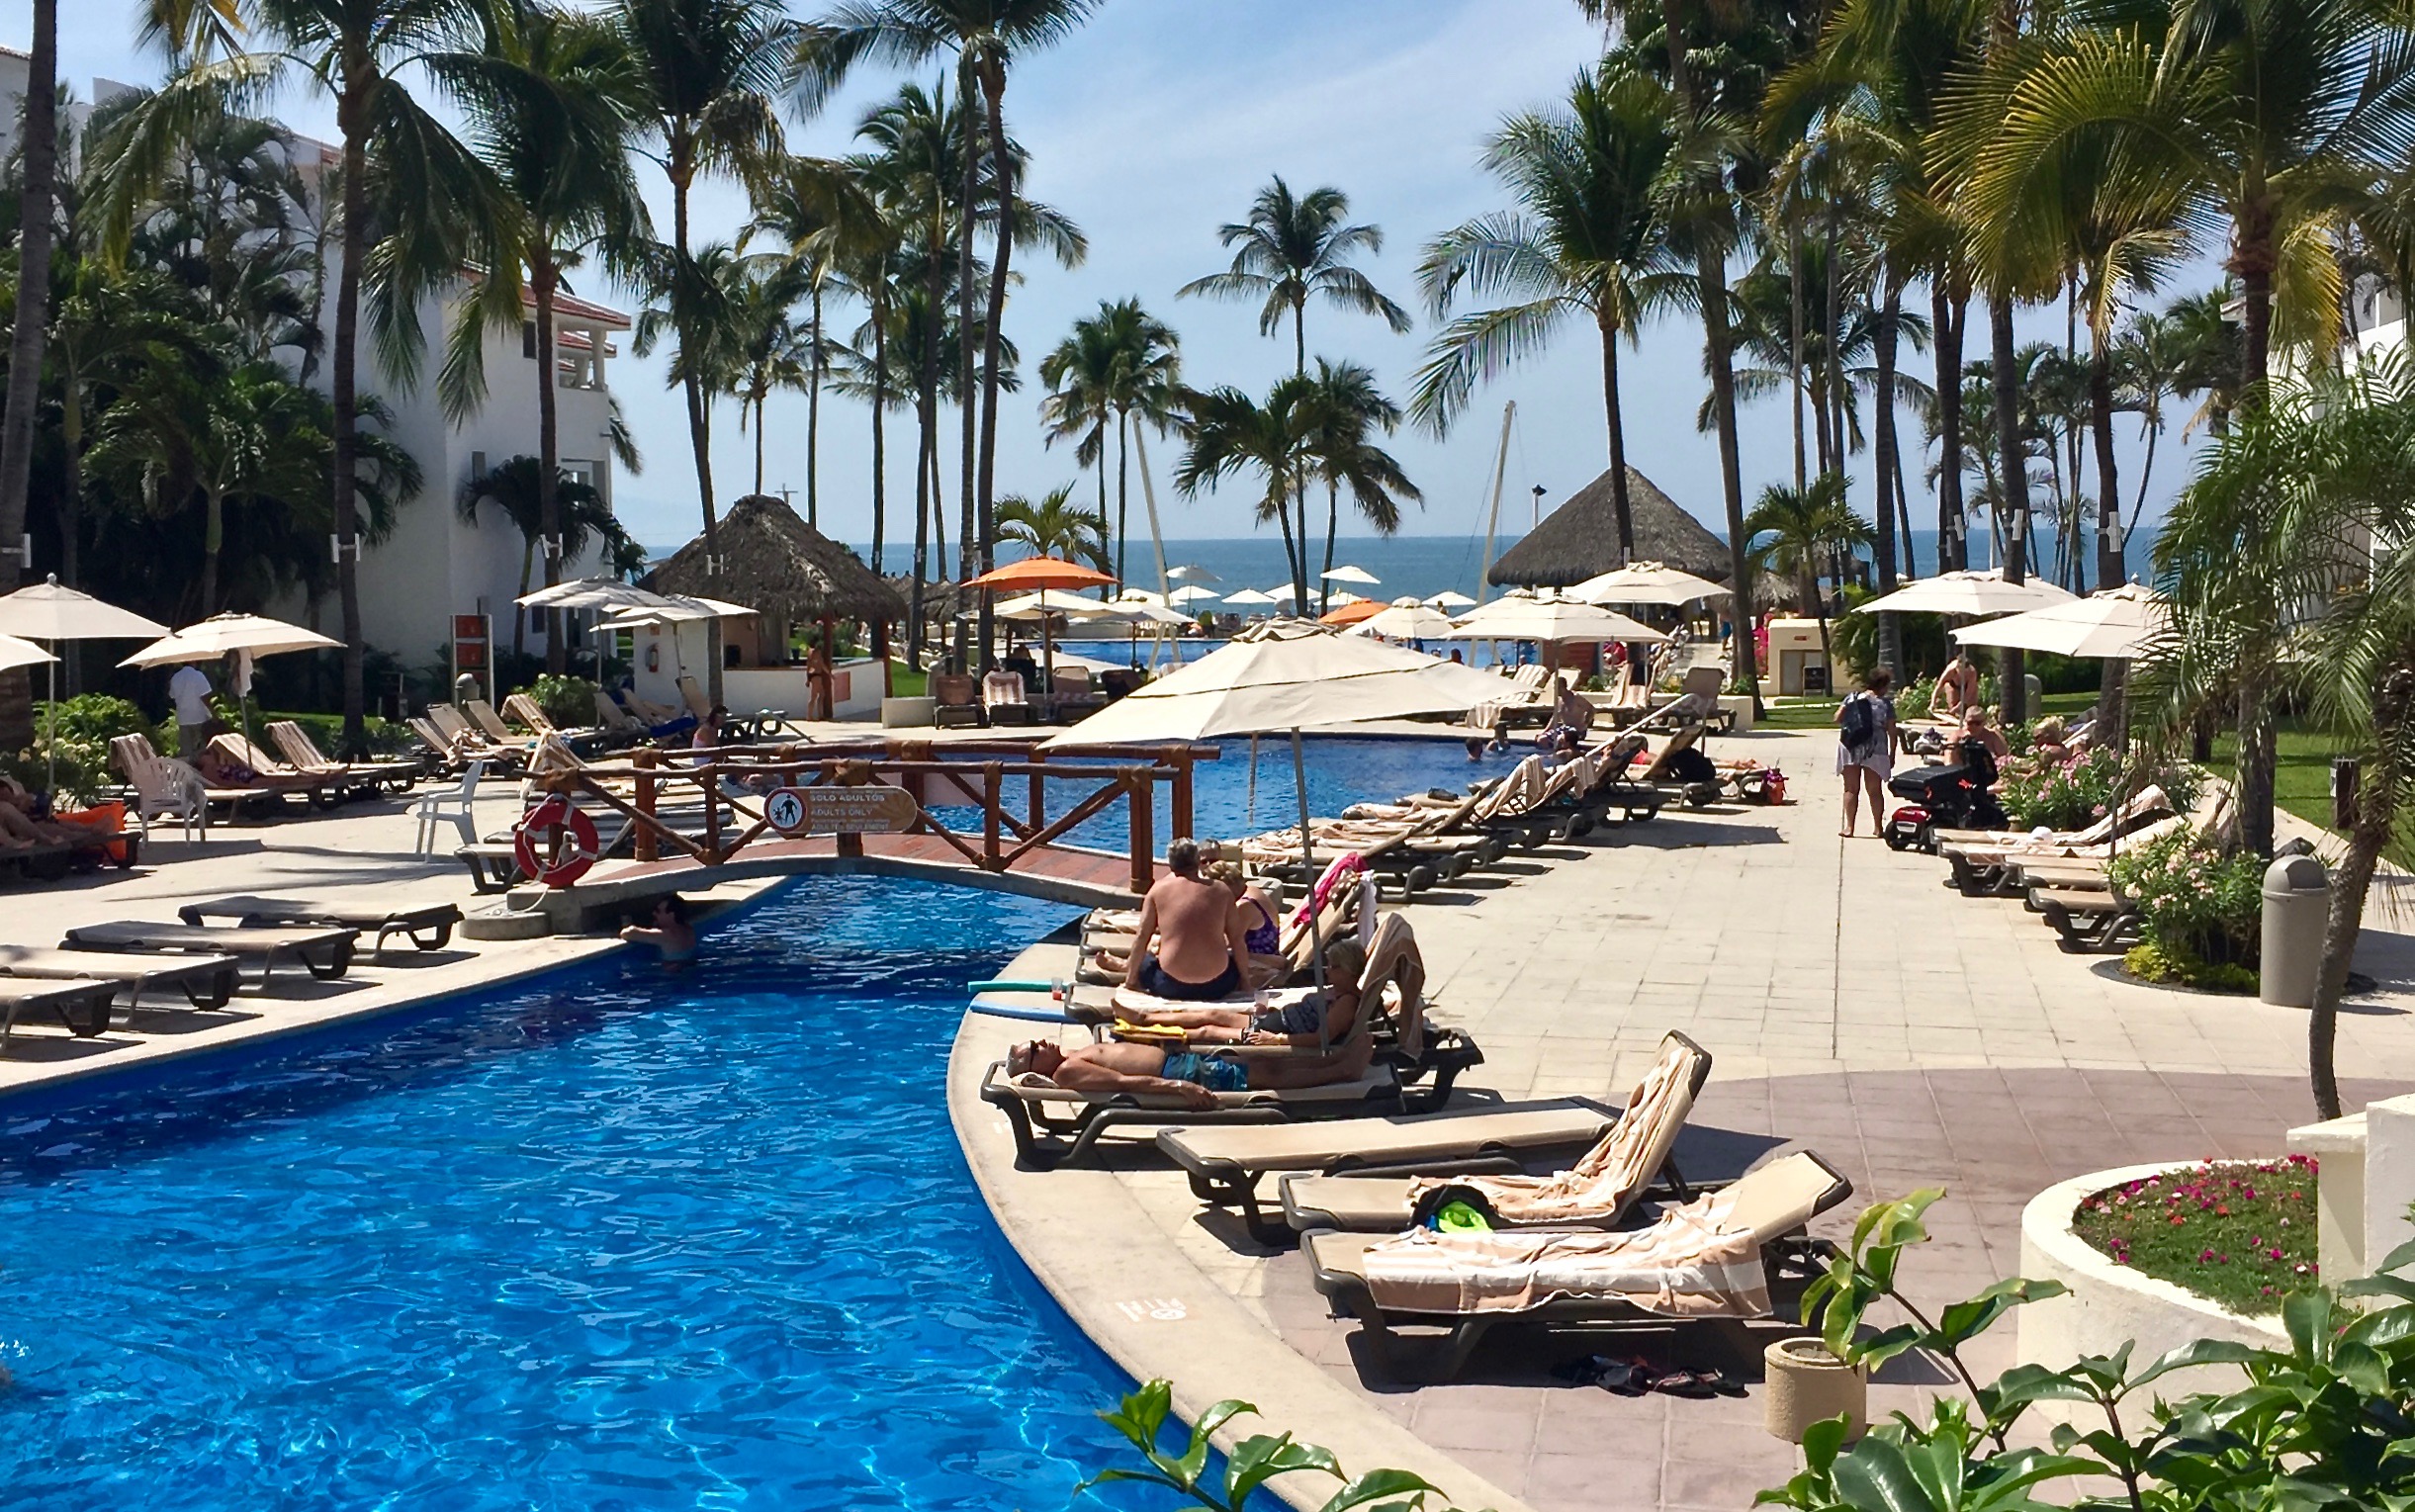 All-Inclusive Resorts: Are They Right for You?